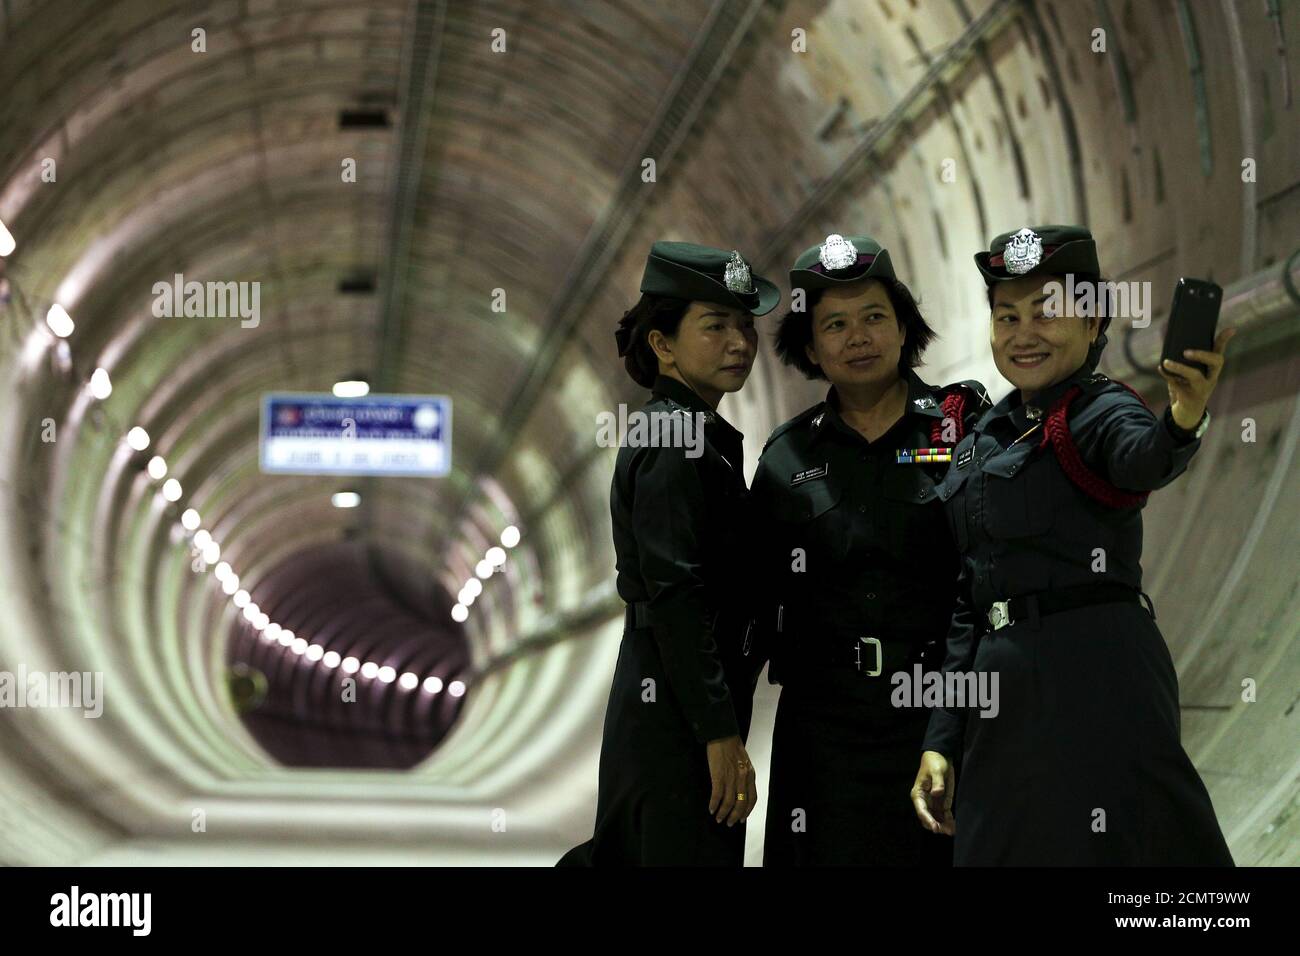 Policewomen take a picture inside a tunnel under the Chao Phraya river at a Mass Rapid Transit subway station in Bangkok, Thailand, December 14, 2015. REUTERS/Athit Perawongmetha      TPX IMAGES OF THE DAY Stock Photo